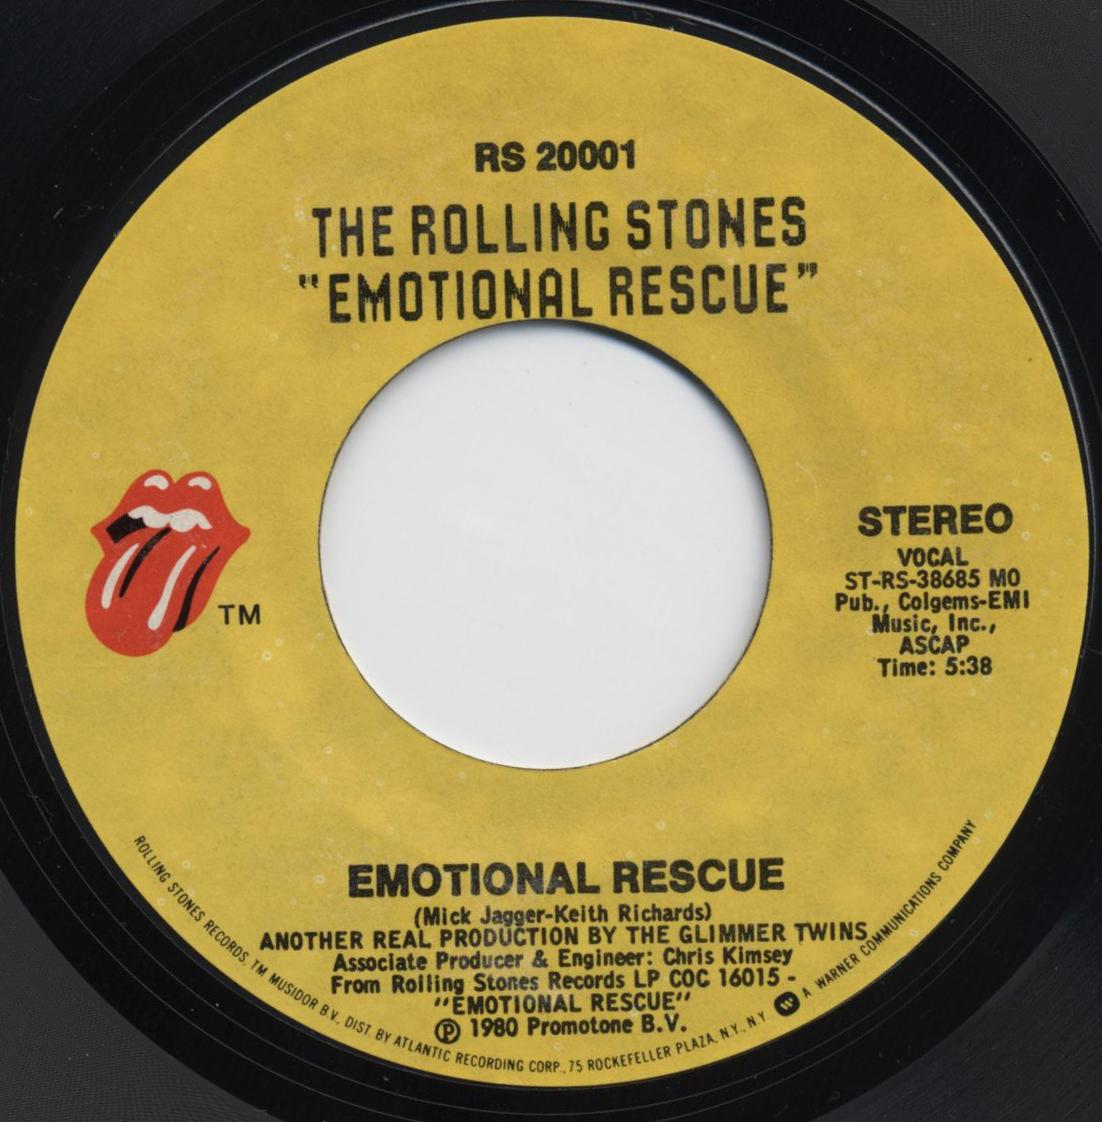 Rolling stones song stoned. The Rolling Stones Emotional Rescue 1980. Rolling Stones Emotional Rescue. The Rolling Stones - 1974 - it's only Rock 'n Roll. Roll песня.